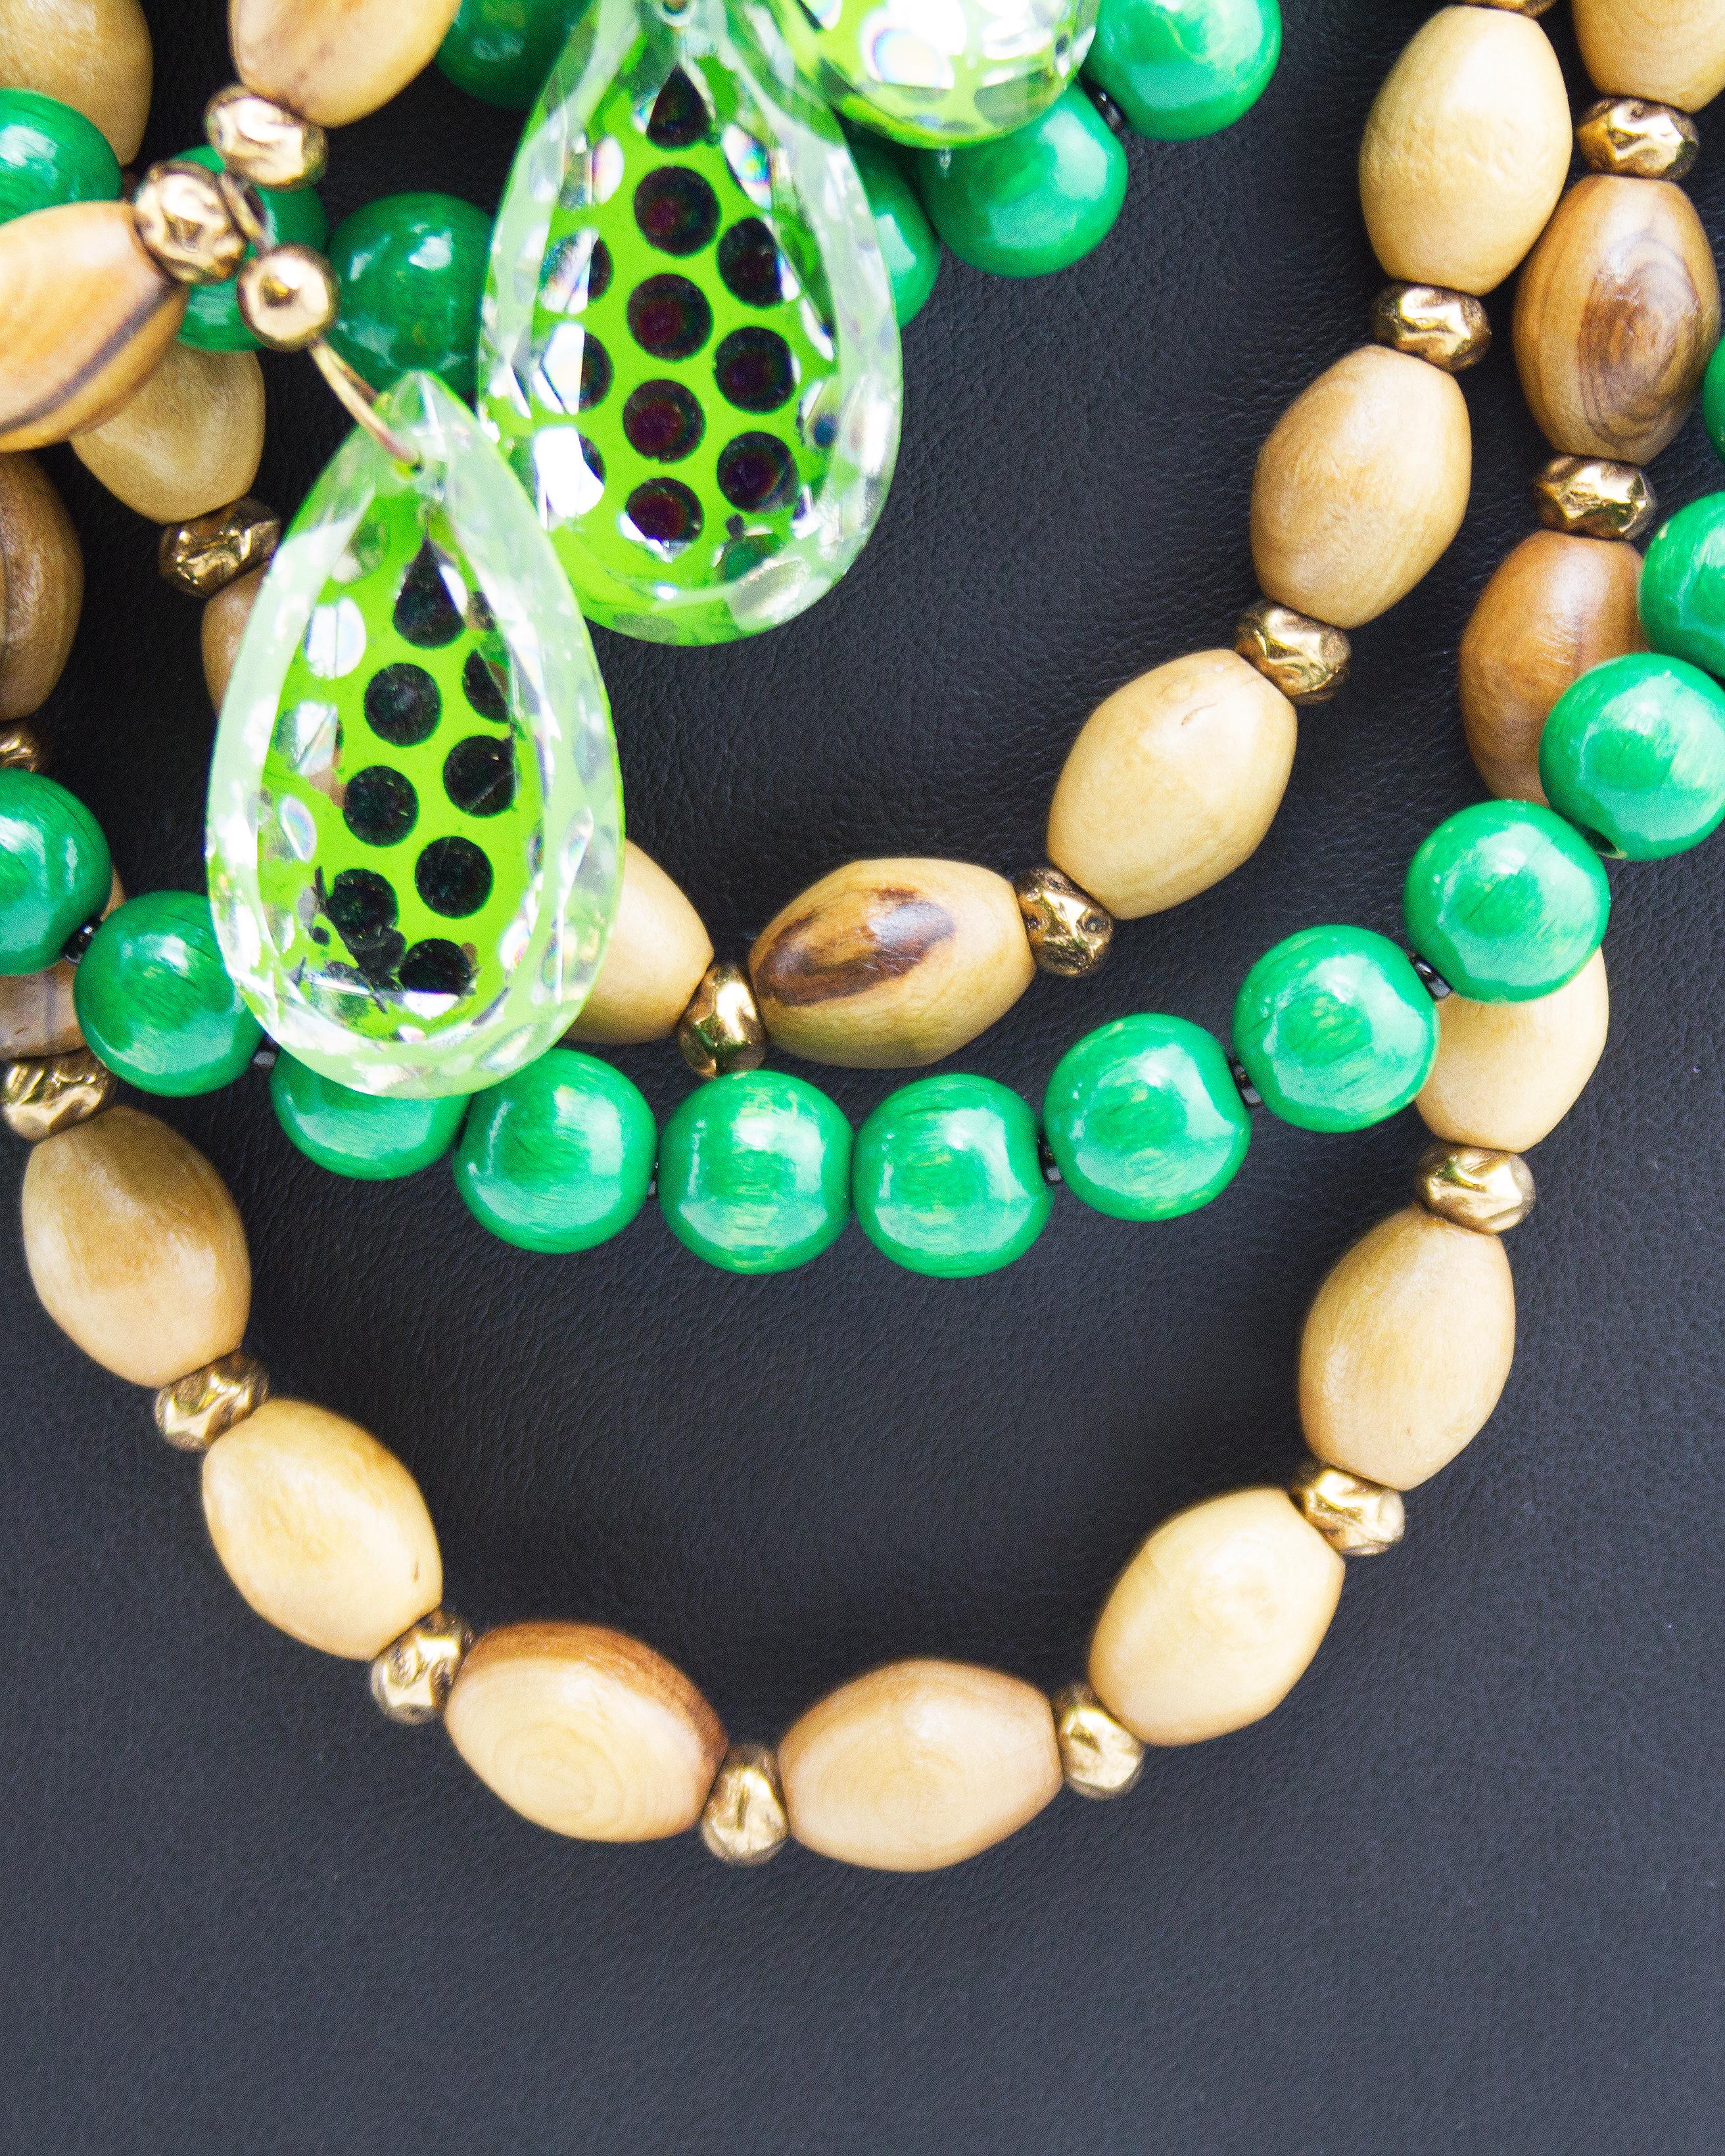 Striking 1980's Yves Saint Laurent Rive Gauche multi strand statement necklace. Dating from the Lou Lou de La Falaise era. Green and light brown wood beads, with large tear drop shaped clear beads with neon green and silver polka dot details. Small